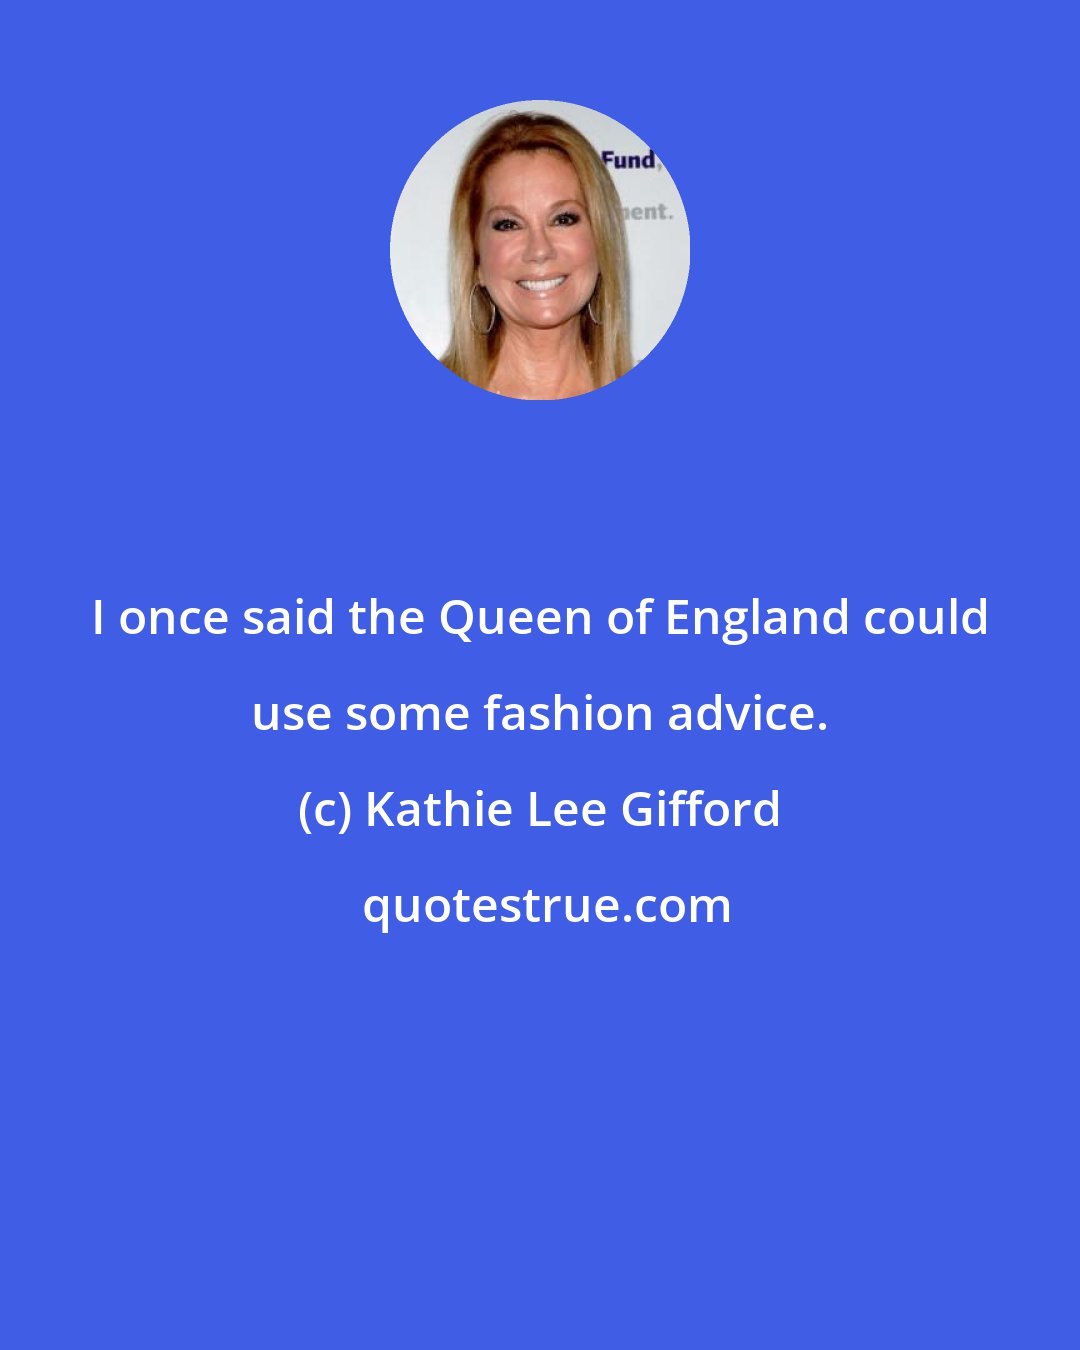 Kathie Lee Gifford: I once said the Queen of England could use some fashion advice.